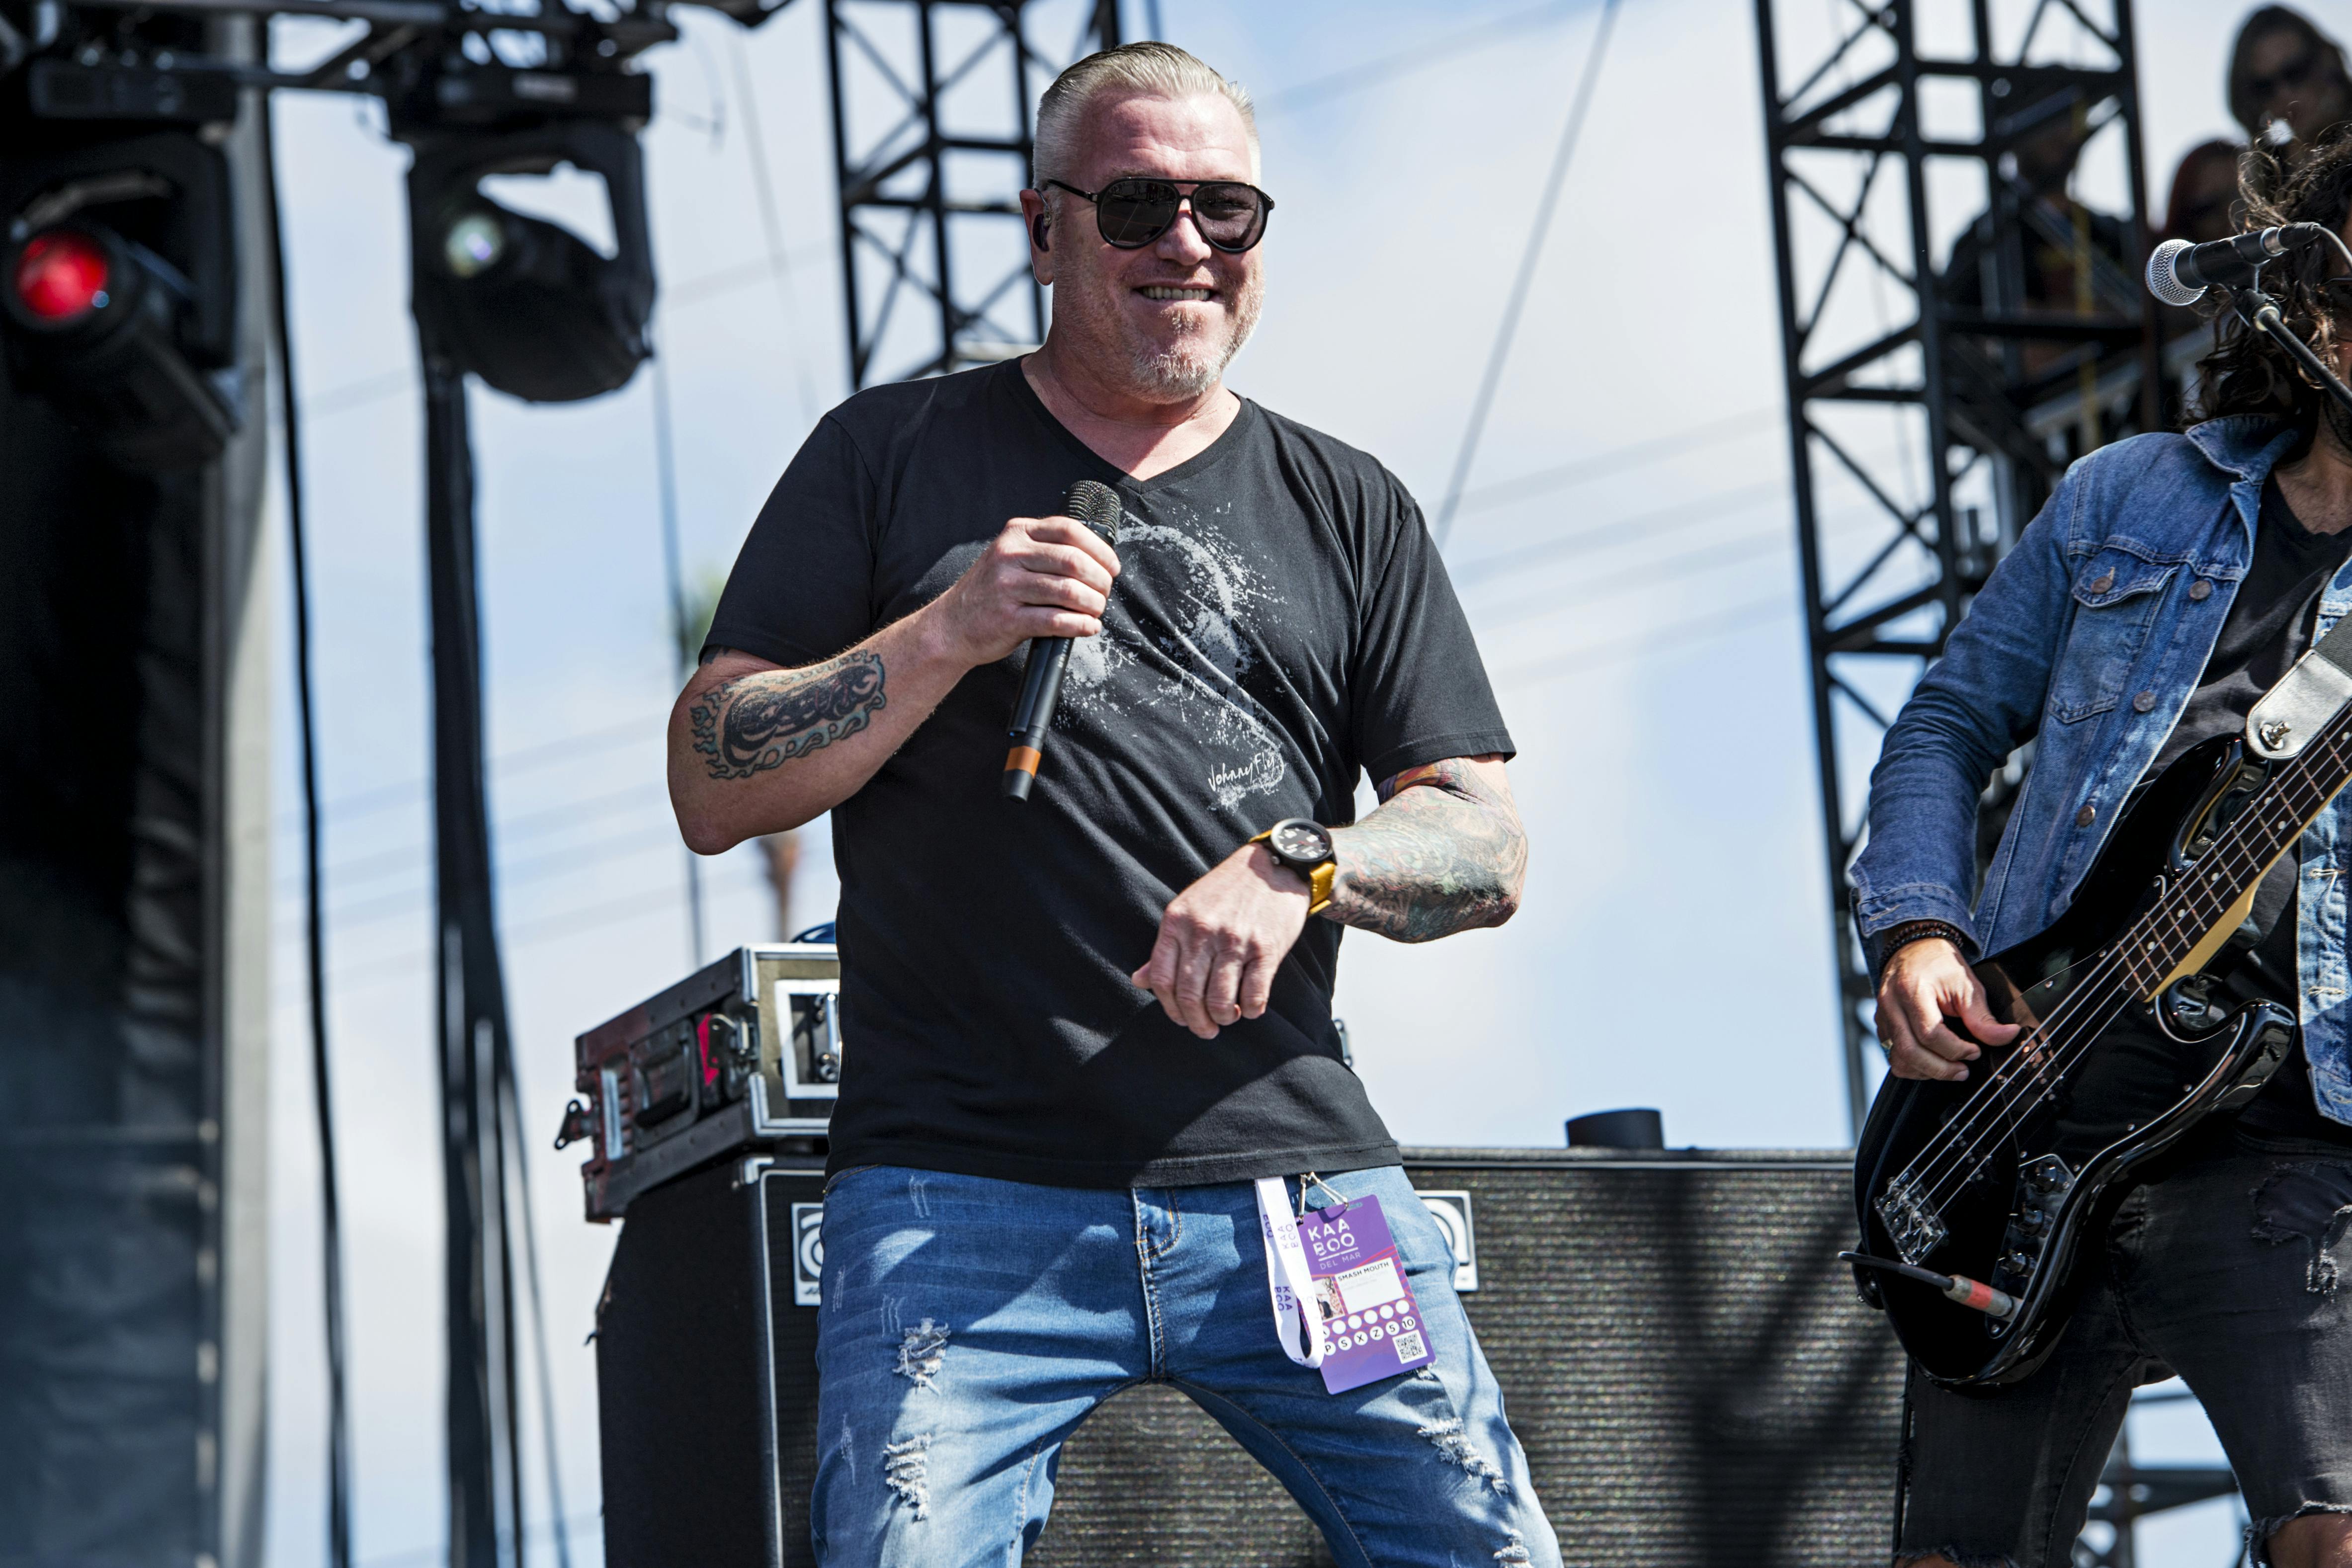 Steve Harwell of Smash Mouth seen at KAABOO 2017 at the Del Mar Racetrack and Fairgrounds on Friday, Sept. 15, 2017, in San Diego, Calif. (Photo by Amy Harris/Invision/AP)